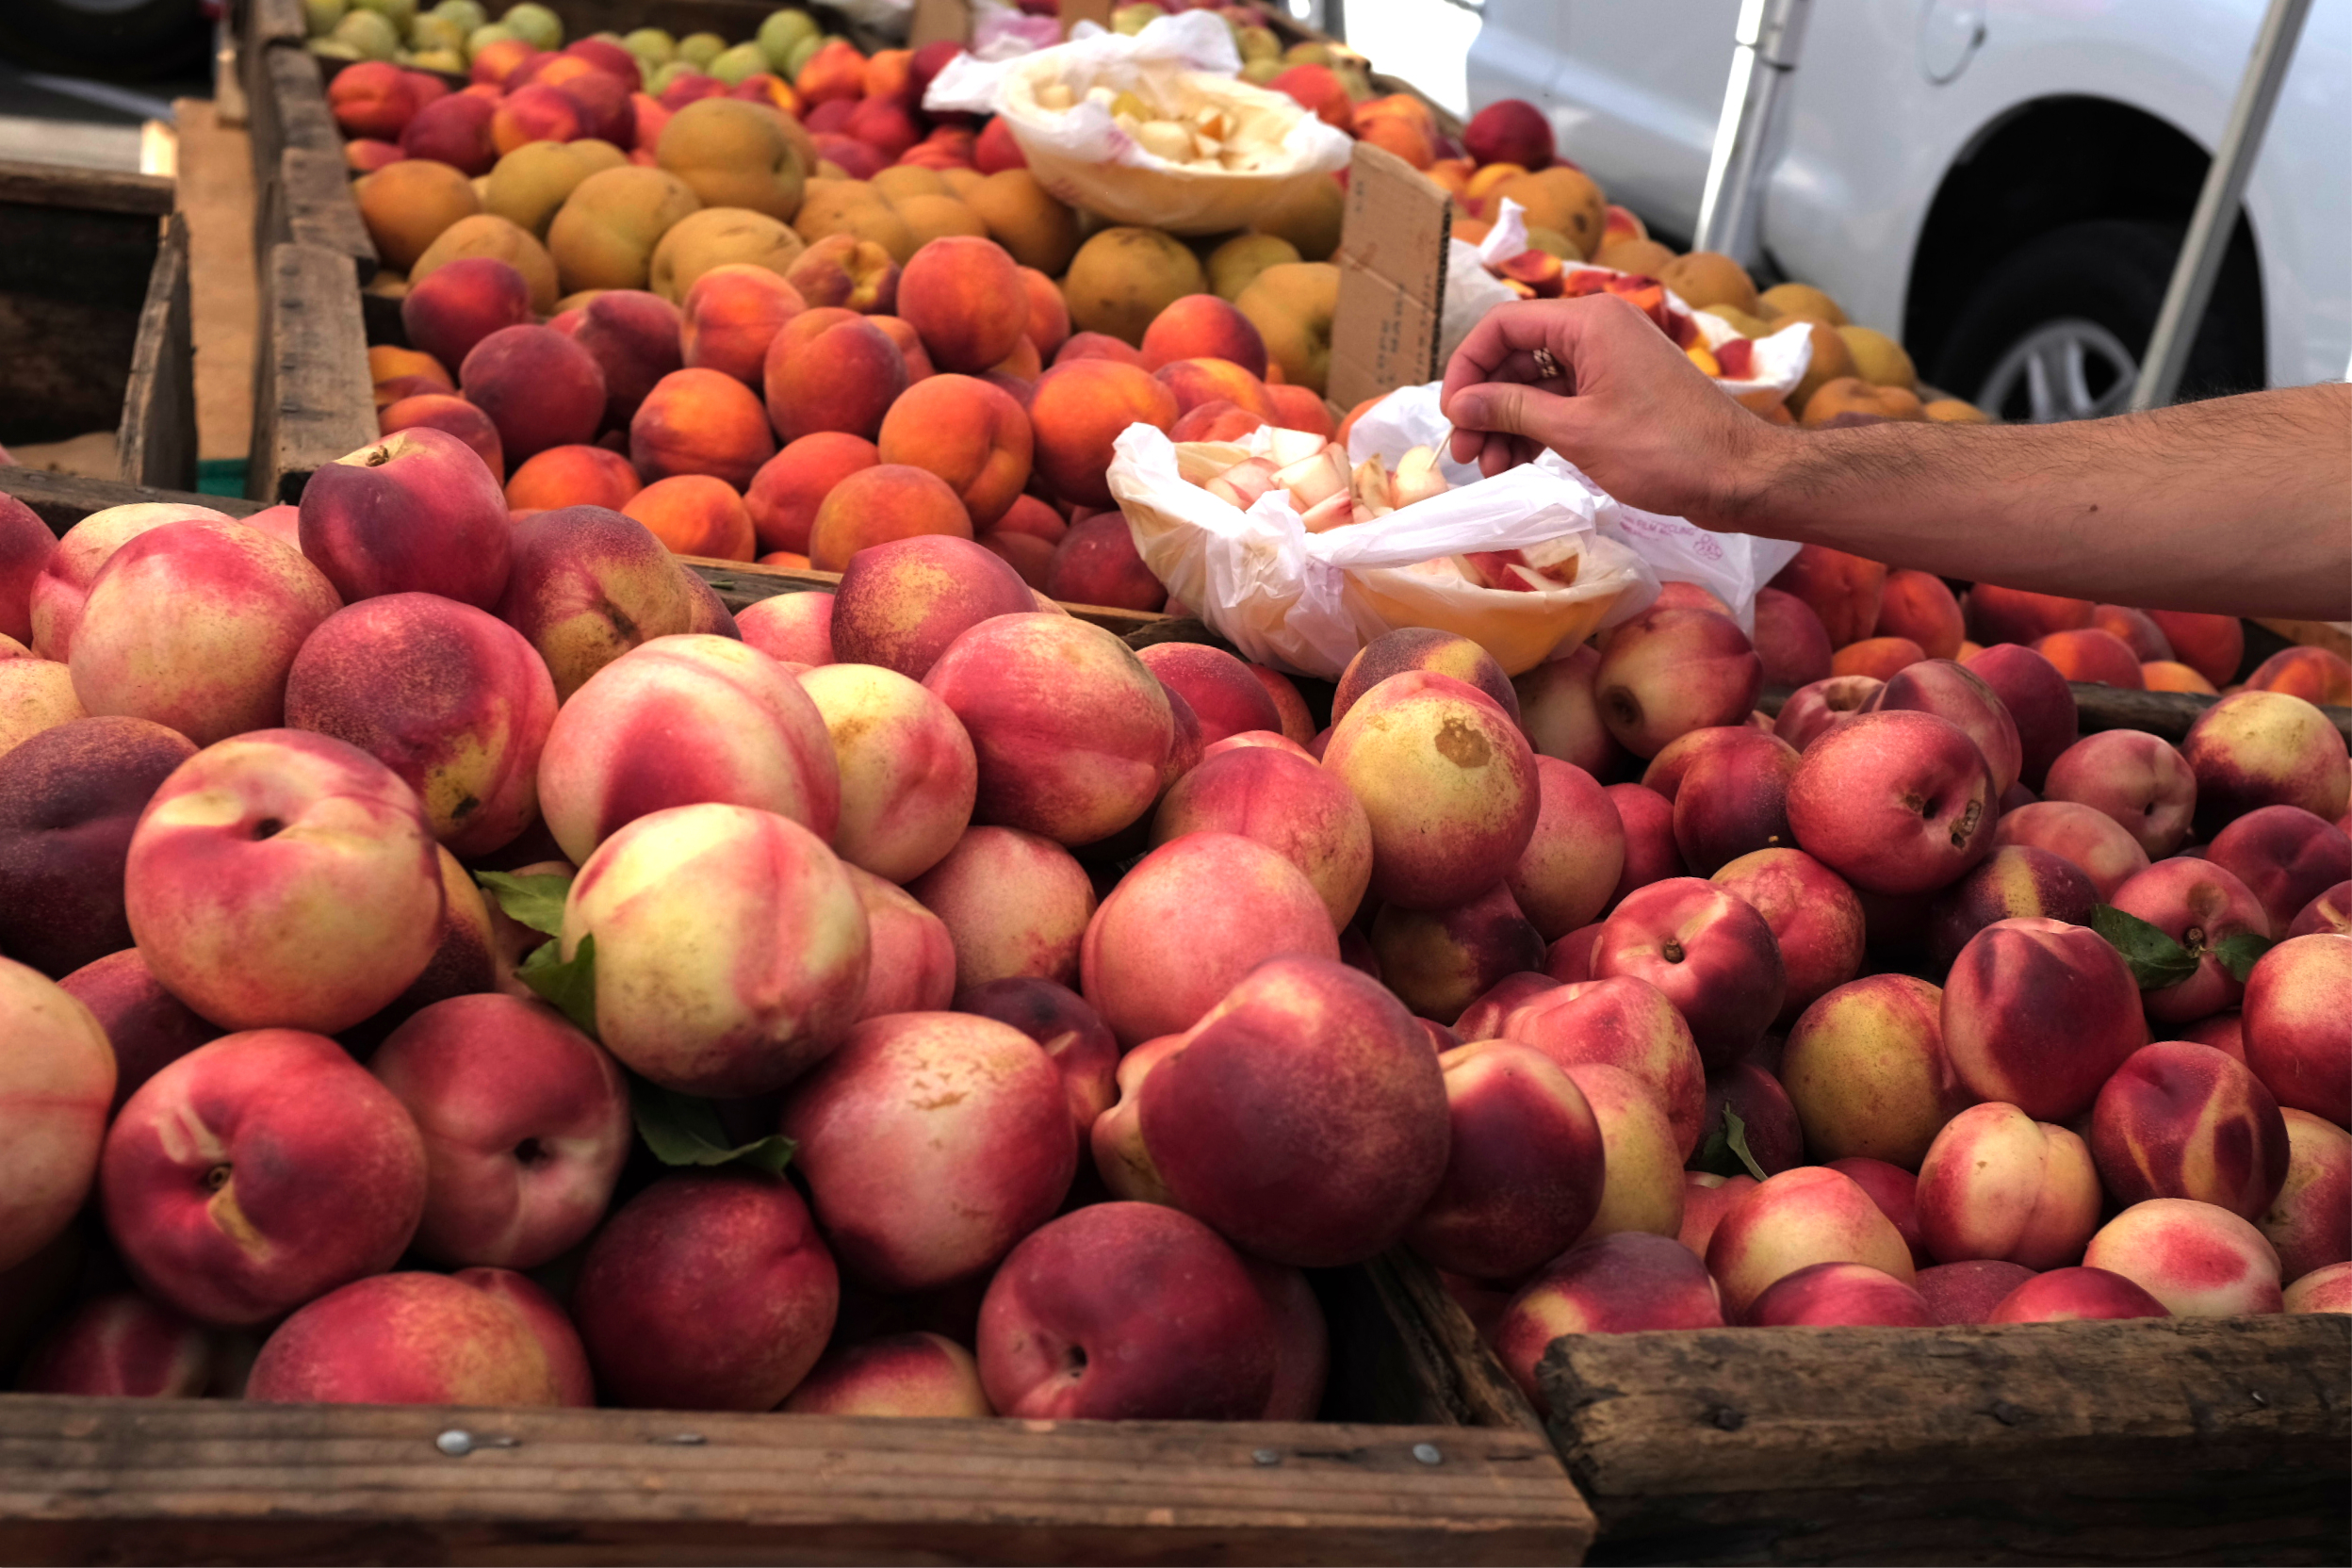 Seven Reasons to Shop at the Farmer’s Market